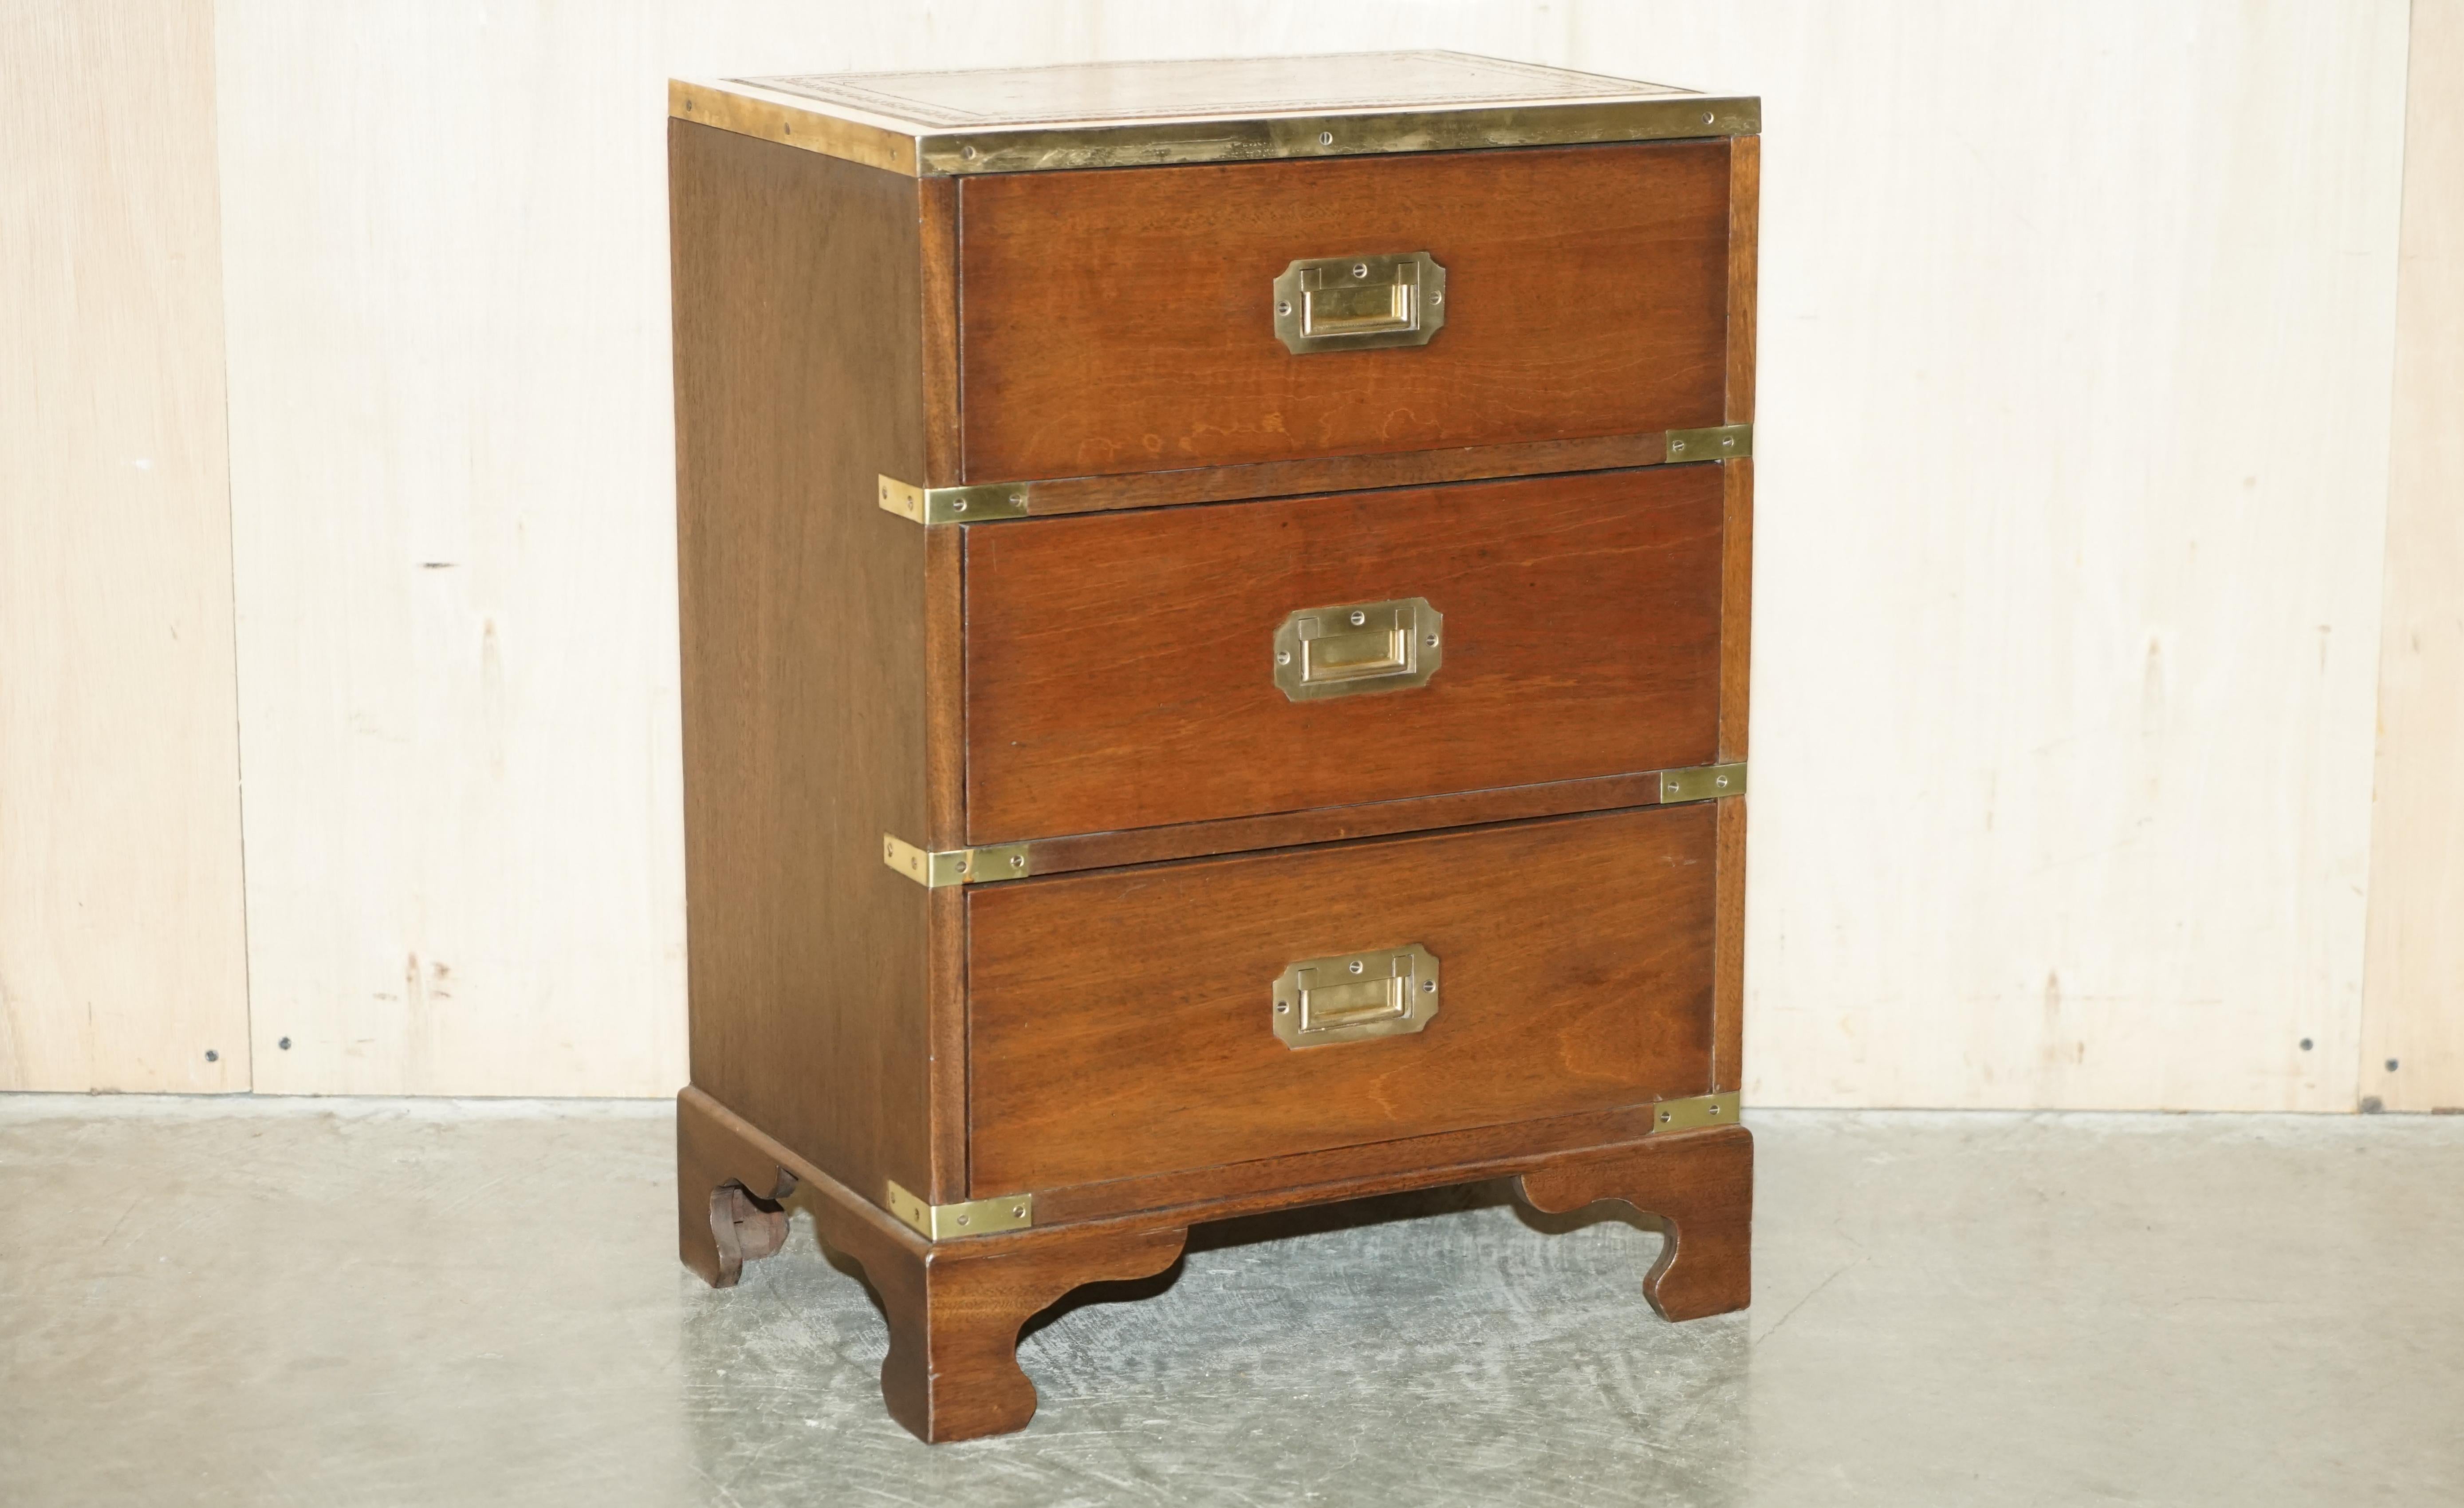 We are delighted to offer for sale this sublime, fully restored, vintage Harrods Kennedy Military Campaign side table with drawers and Brown leather top 

A truly stunning and well made piece by Kennedy Furniture and retailed through Harrods